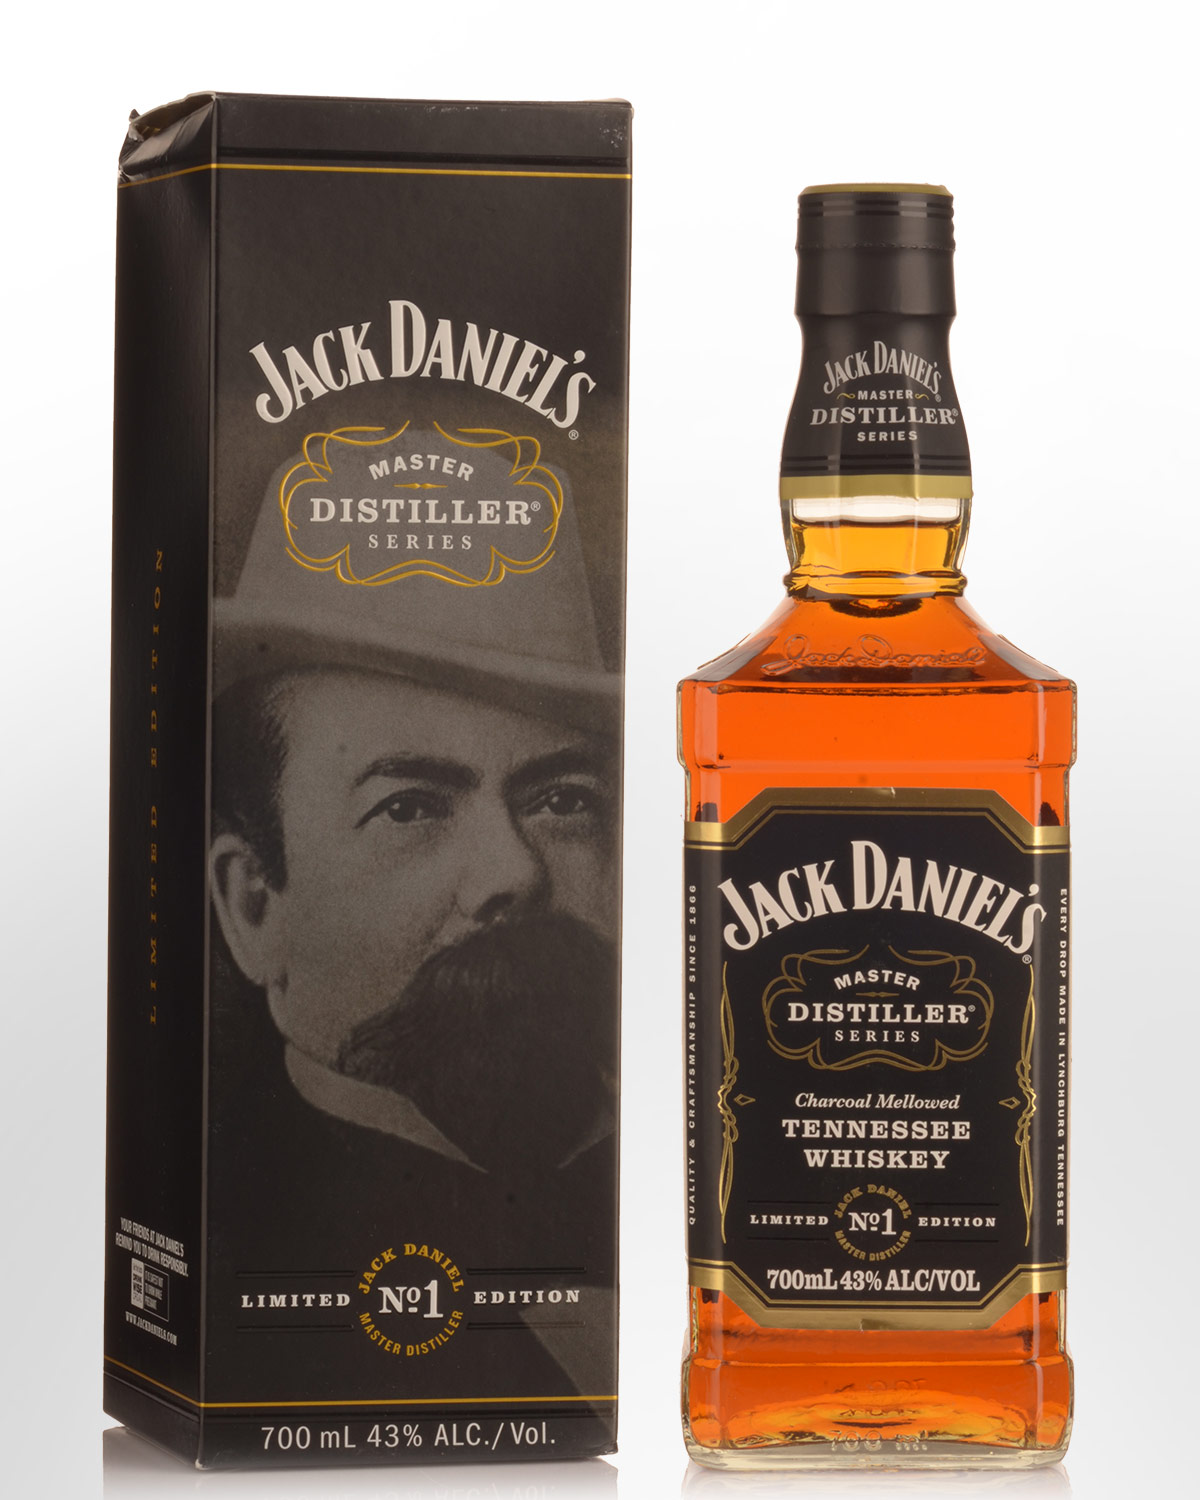 JACK DANIEL'S WHISKEY COLLECTION (3 BOTTLES) - $59.99 - $125 Free Shipping  